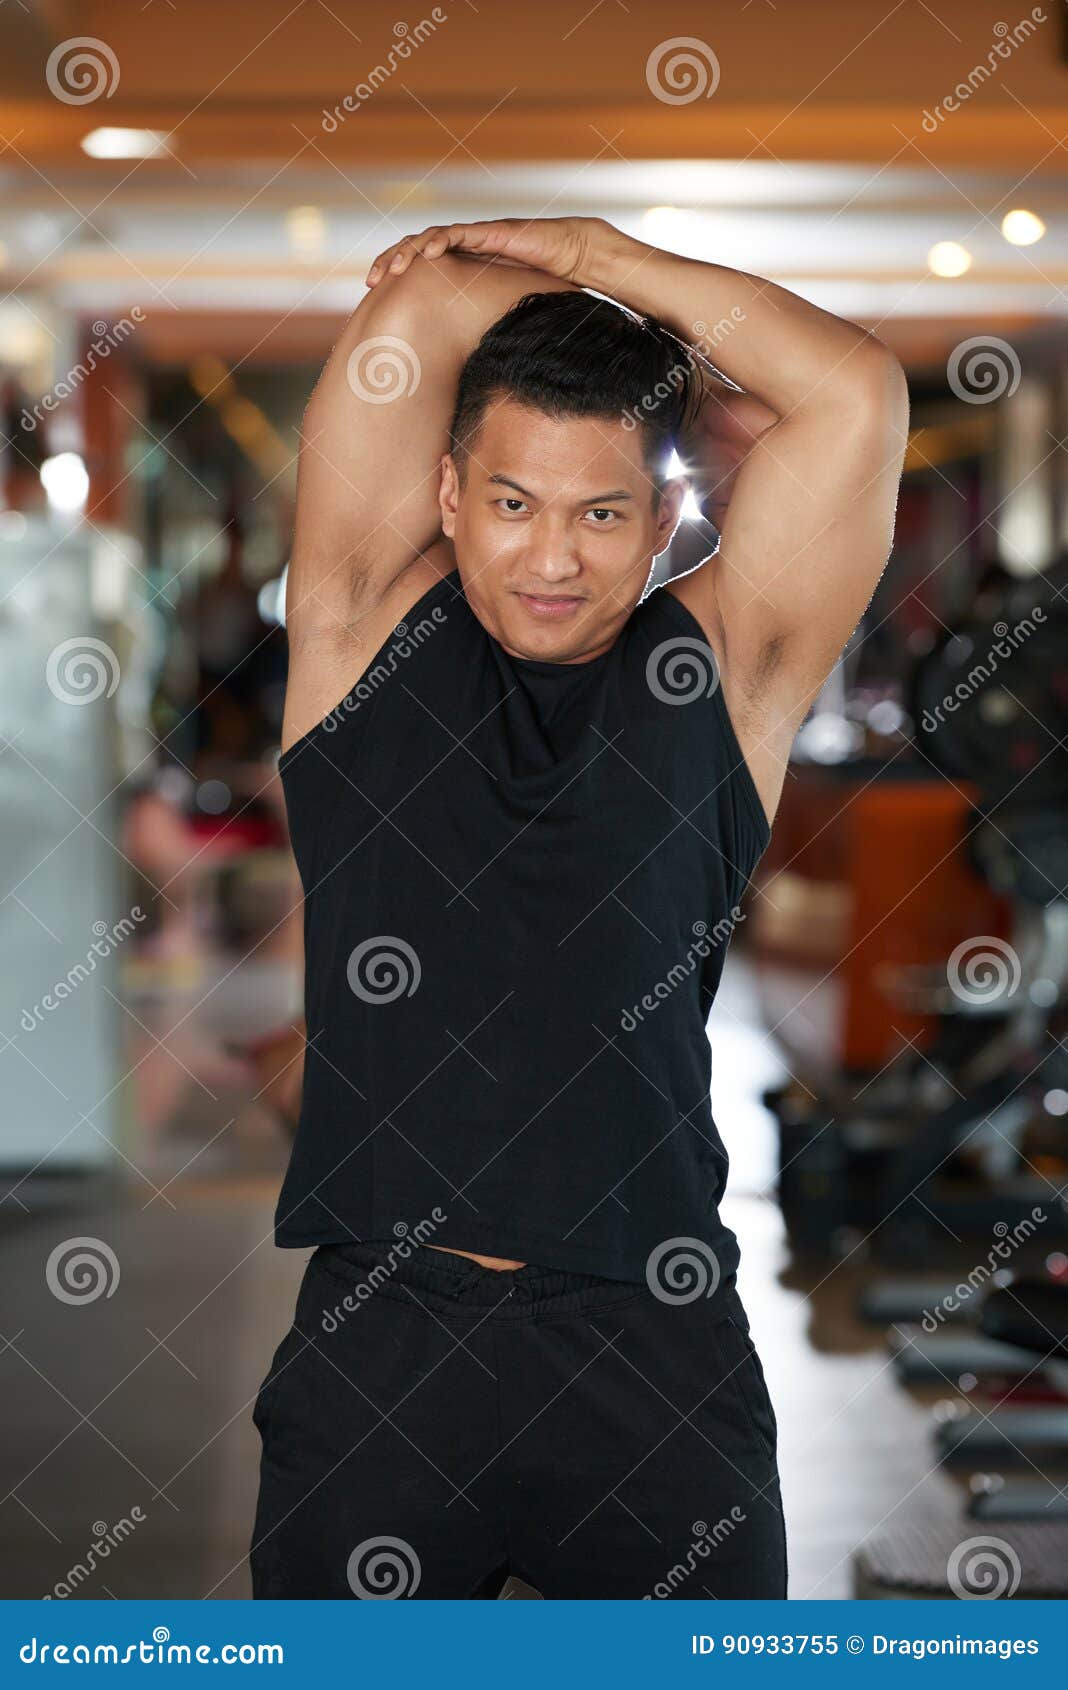 Stretching arms stock image. Image of warming, malaysian - 90933755